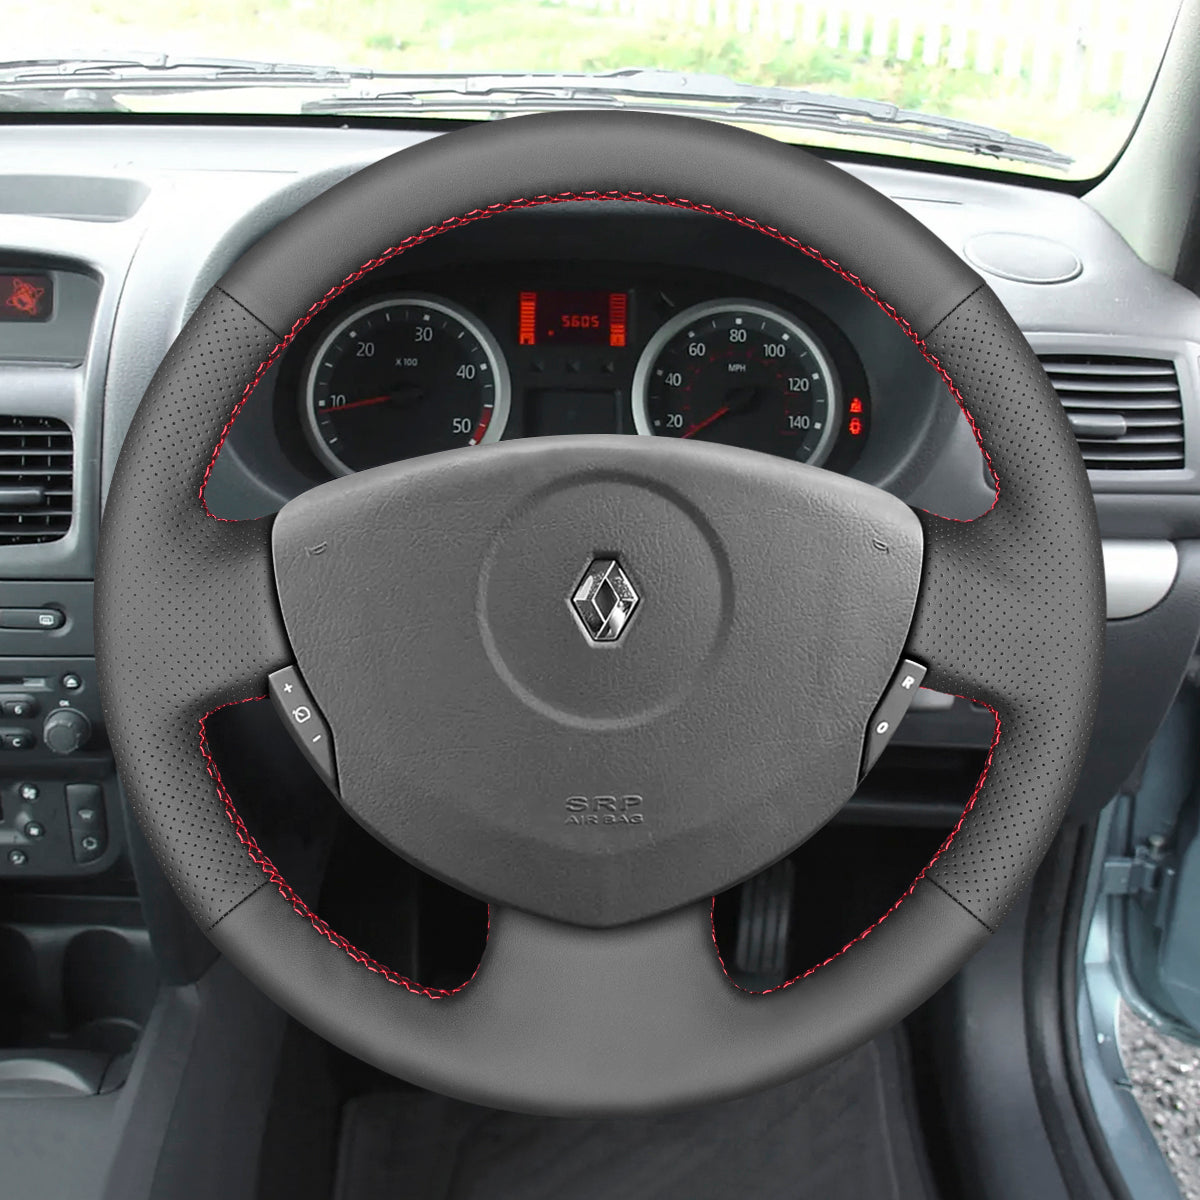 MEWANT Hand Stitch Black Leather Car Steering Wheel Cover for Renault Clio Twingo / for Dacia Sandero